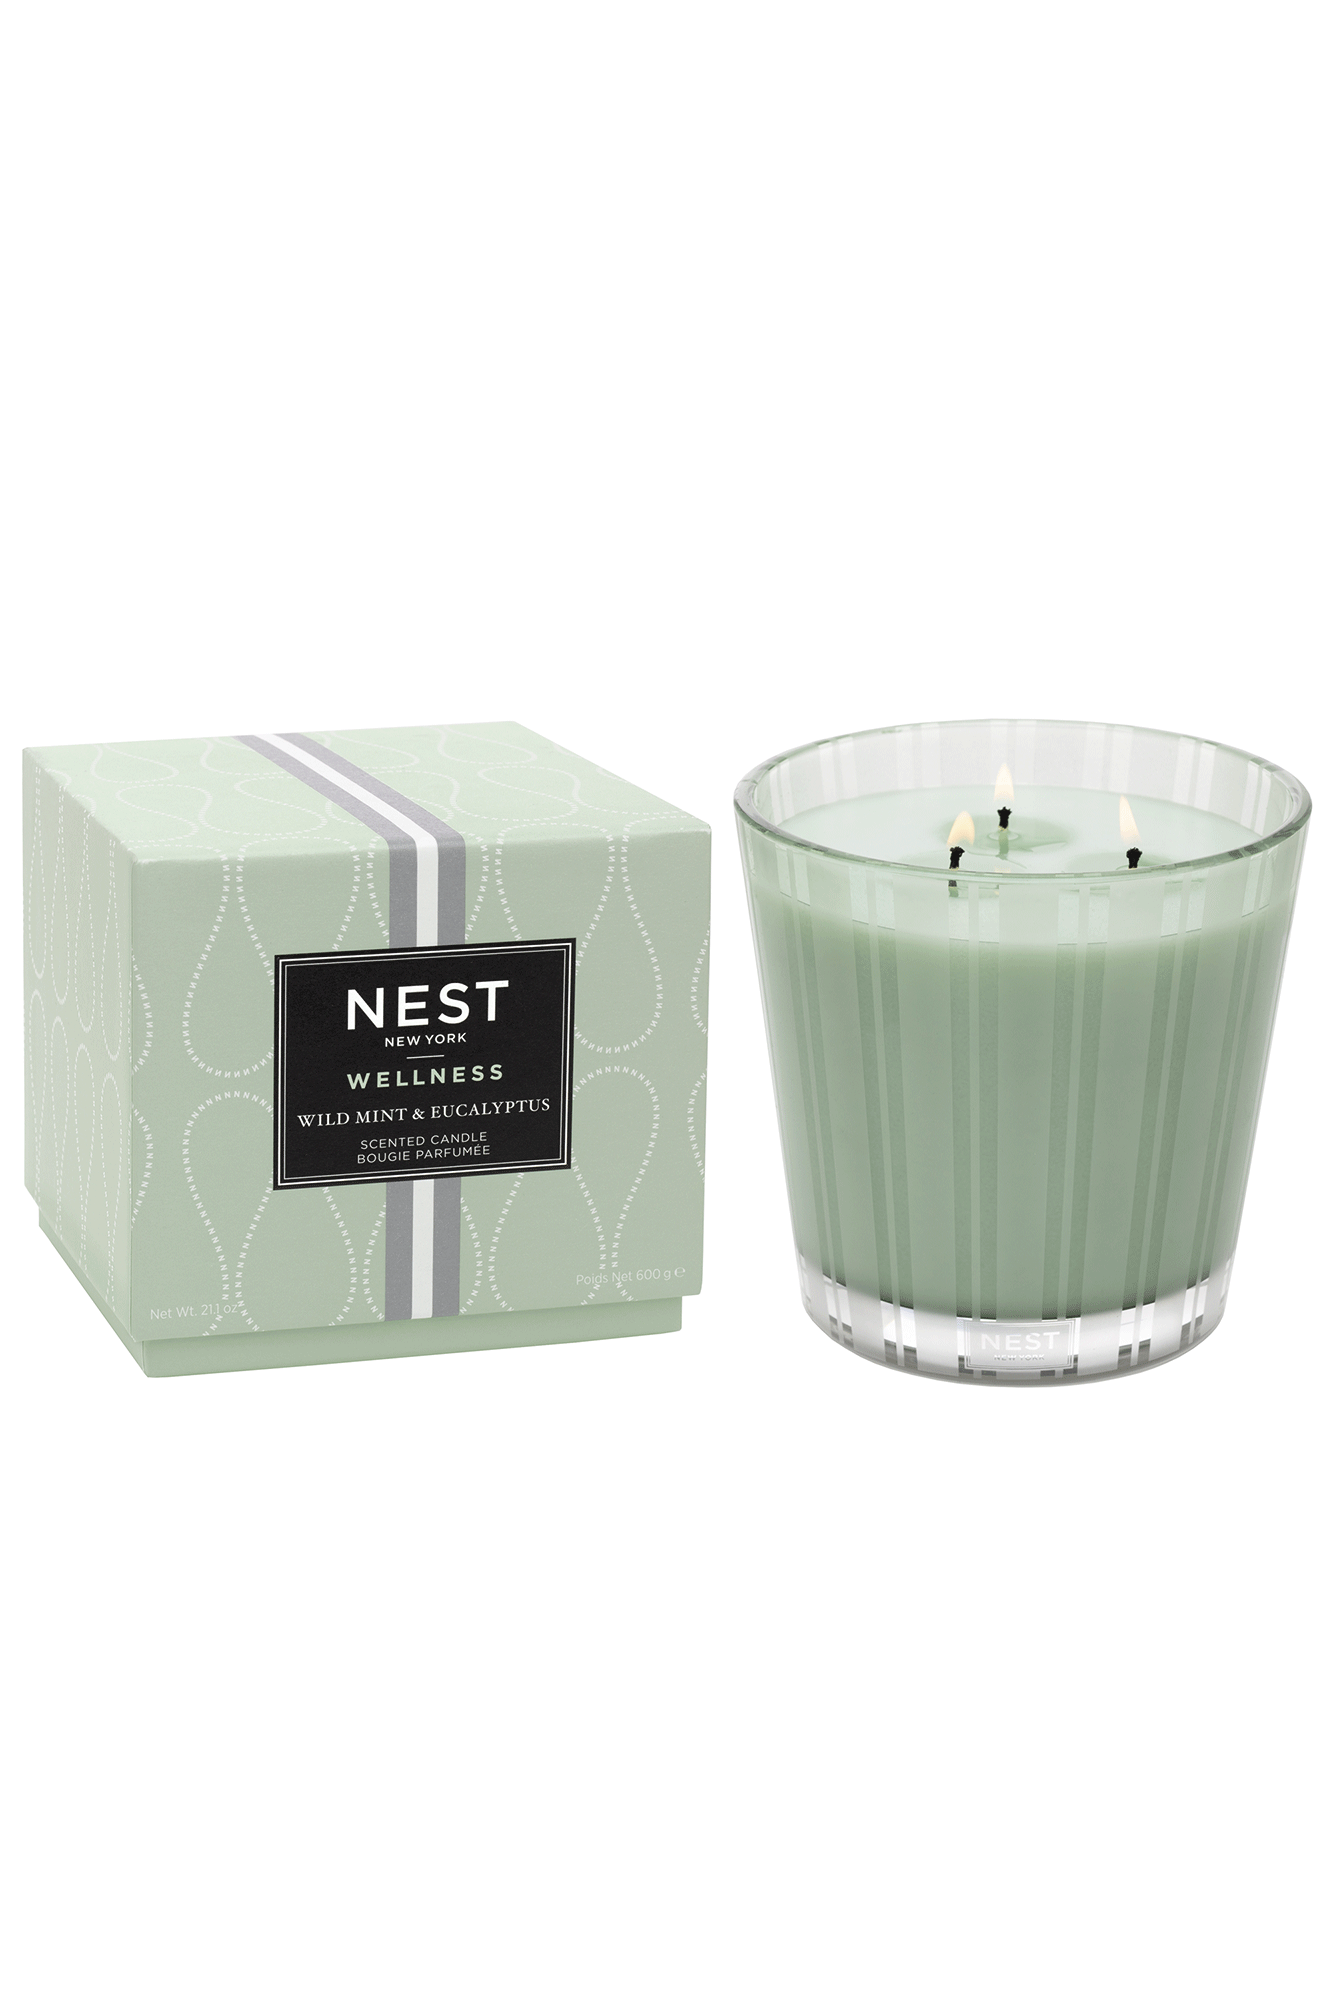 Experience total relaxation without ever leaving your home with this Wild Mint & Eucalyptus 3 Wick Candle. Blending the essence of wild mint and eucalyptus with hints of basil and Thai ginger, this candle offers a unique aroma that will soothe your senses and stimulate your mind. Perfect for any room in need of ambiance and scent.